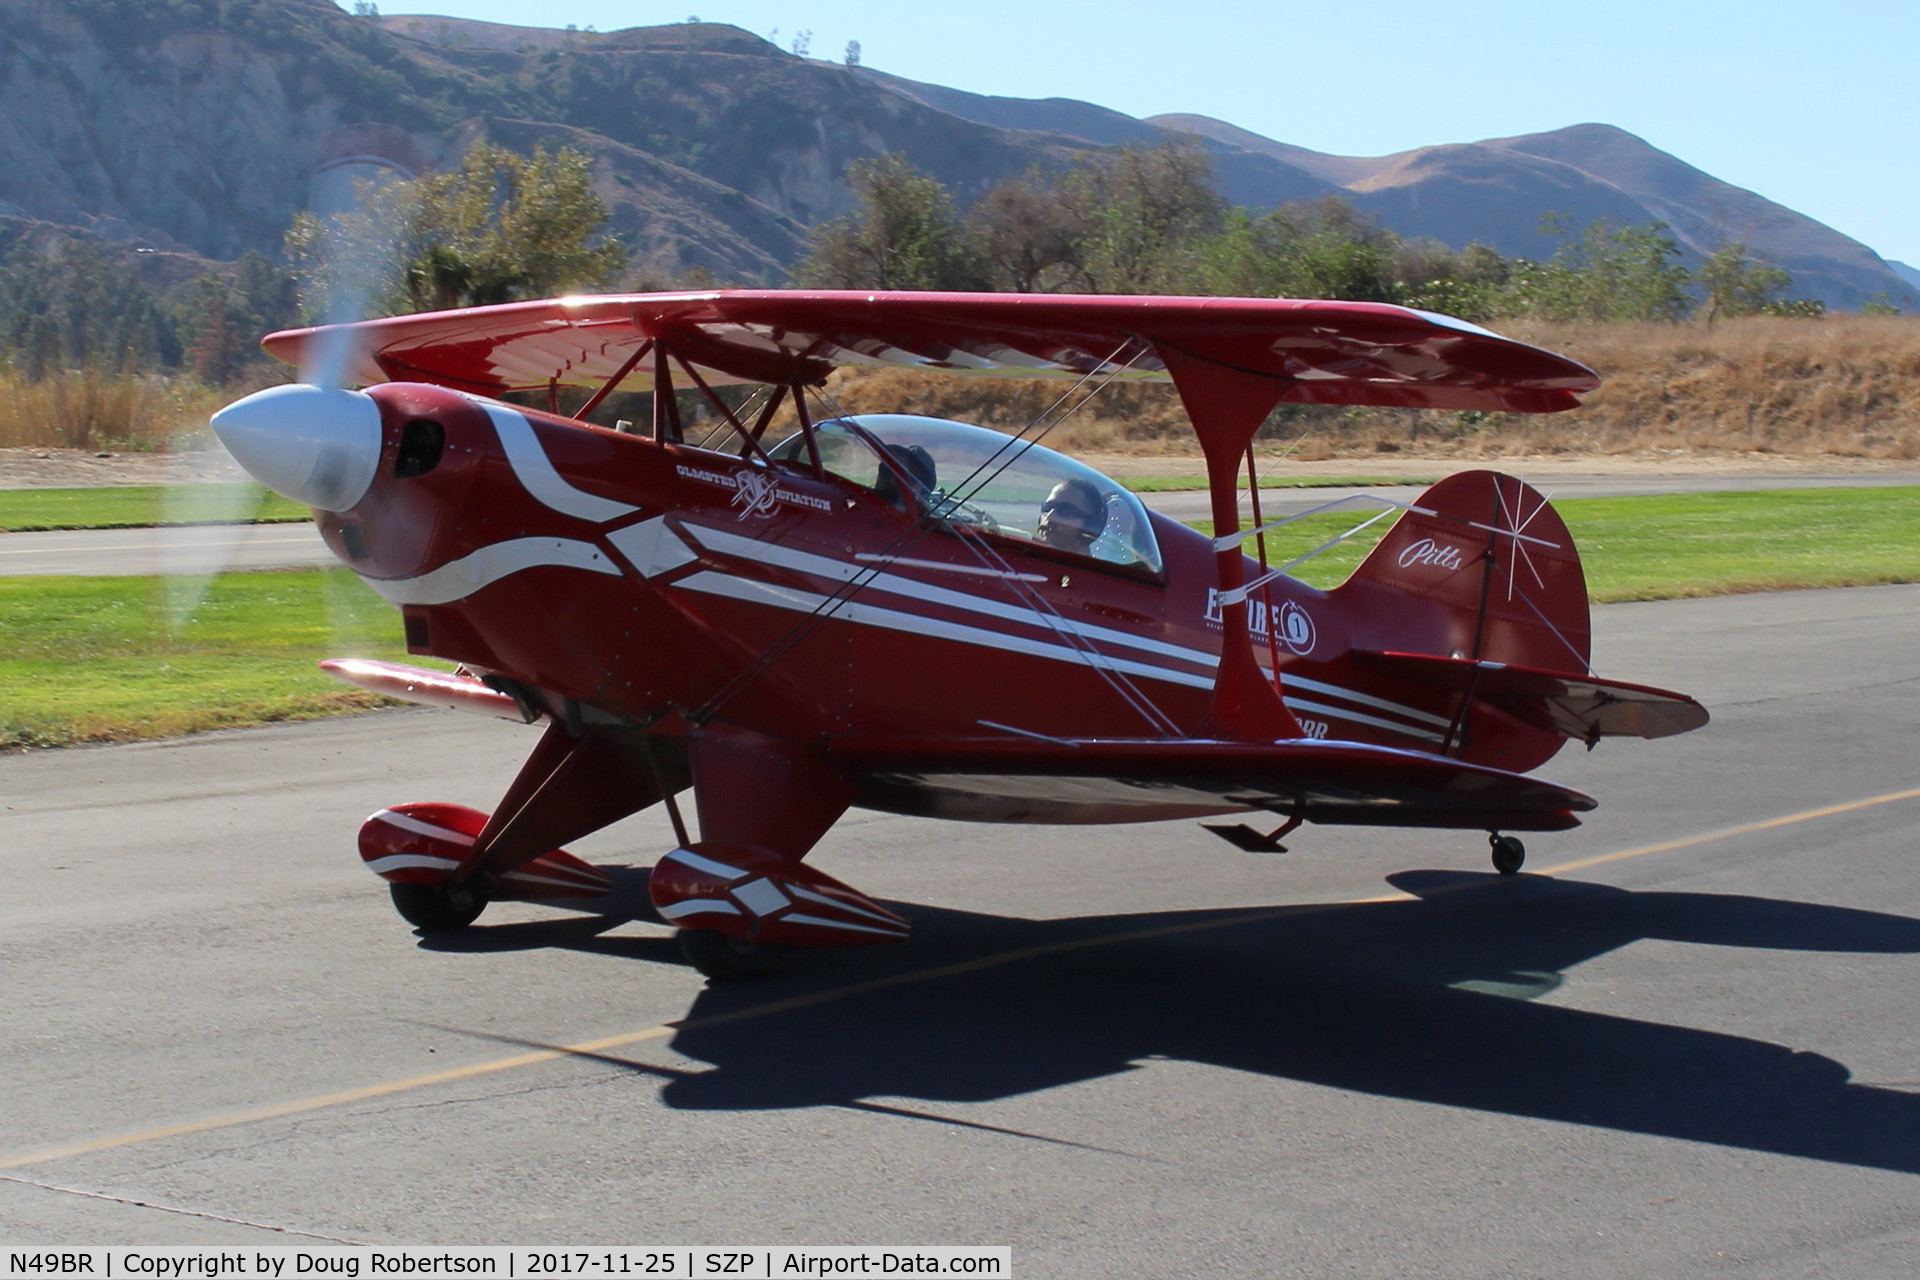 N49BR, Pitts S-2A Special C/N 2212, 1983 Aerotek PITTS S-2A SPECIAL, Lycoming AEIO-360 180 Hp, full inverted systems, S-turns taxi